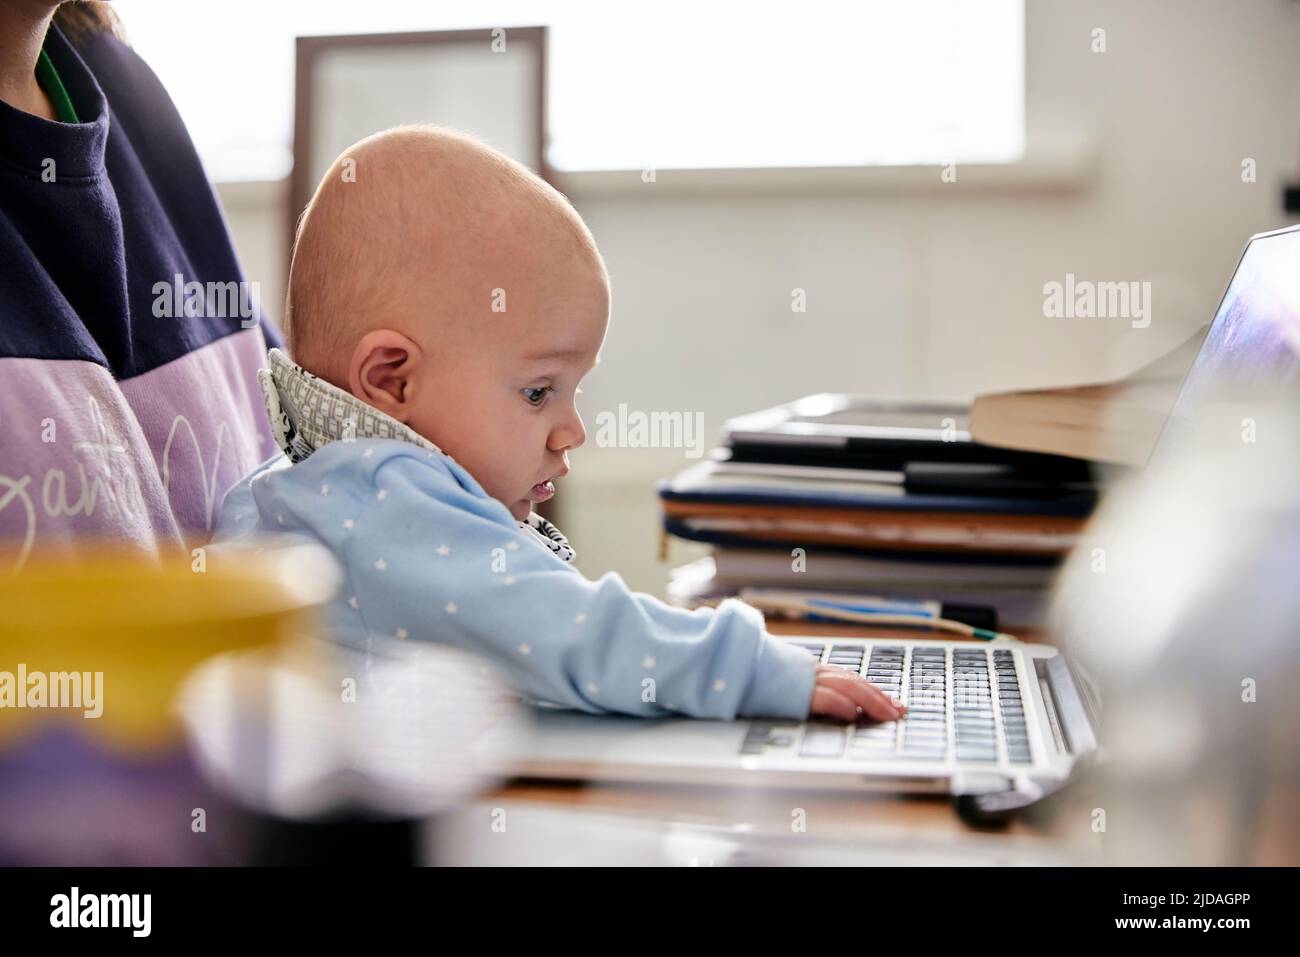 Baby boy touching computer keyboard sitting on mother's lap Stock Photo